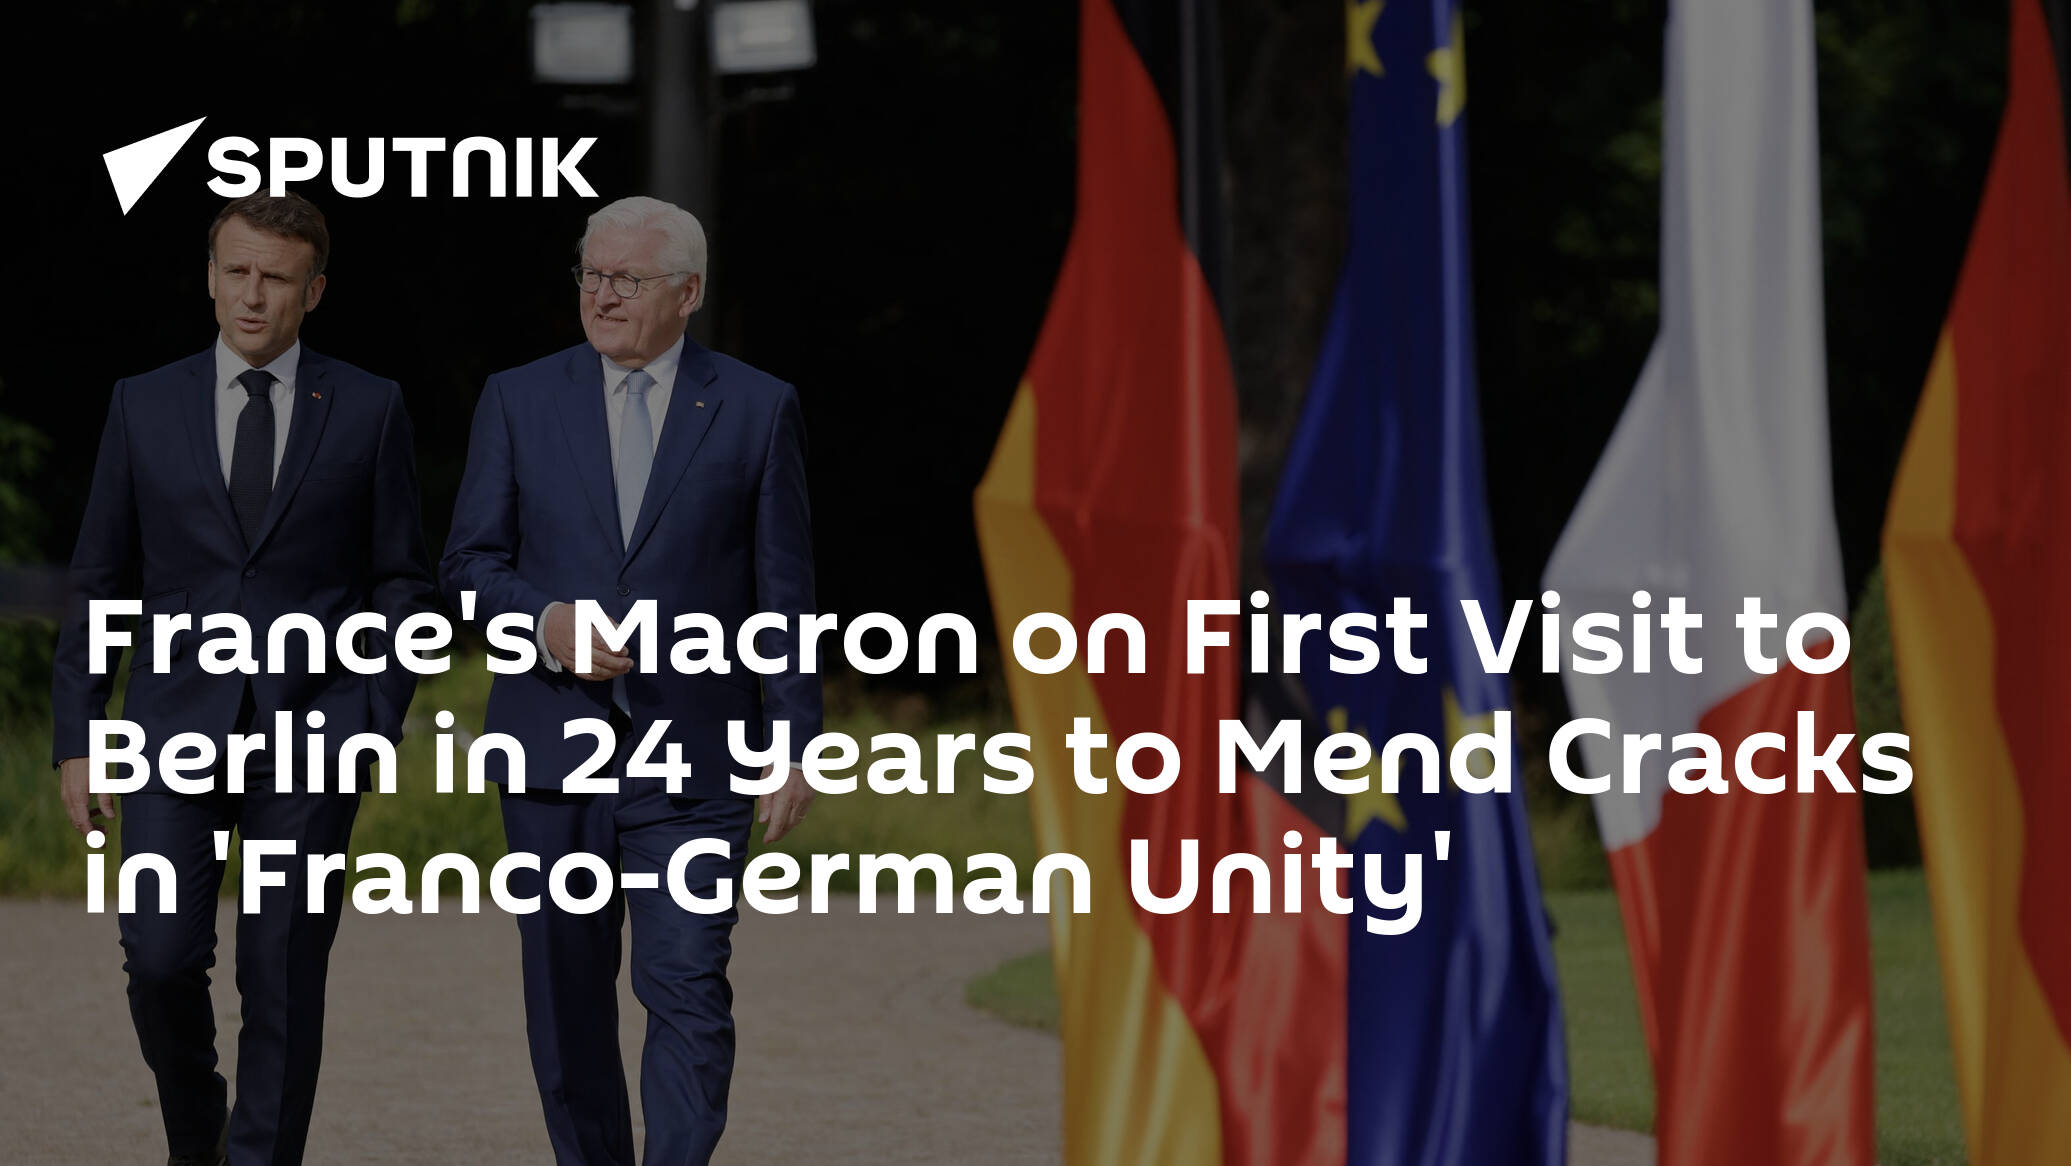 France's Macron on First Visit to Berlin in 24 Years